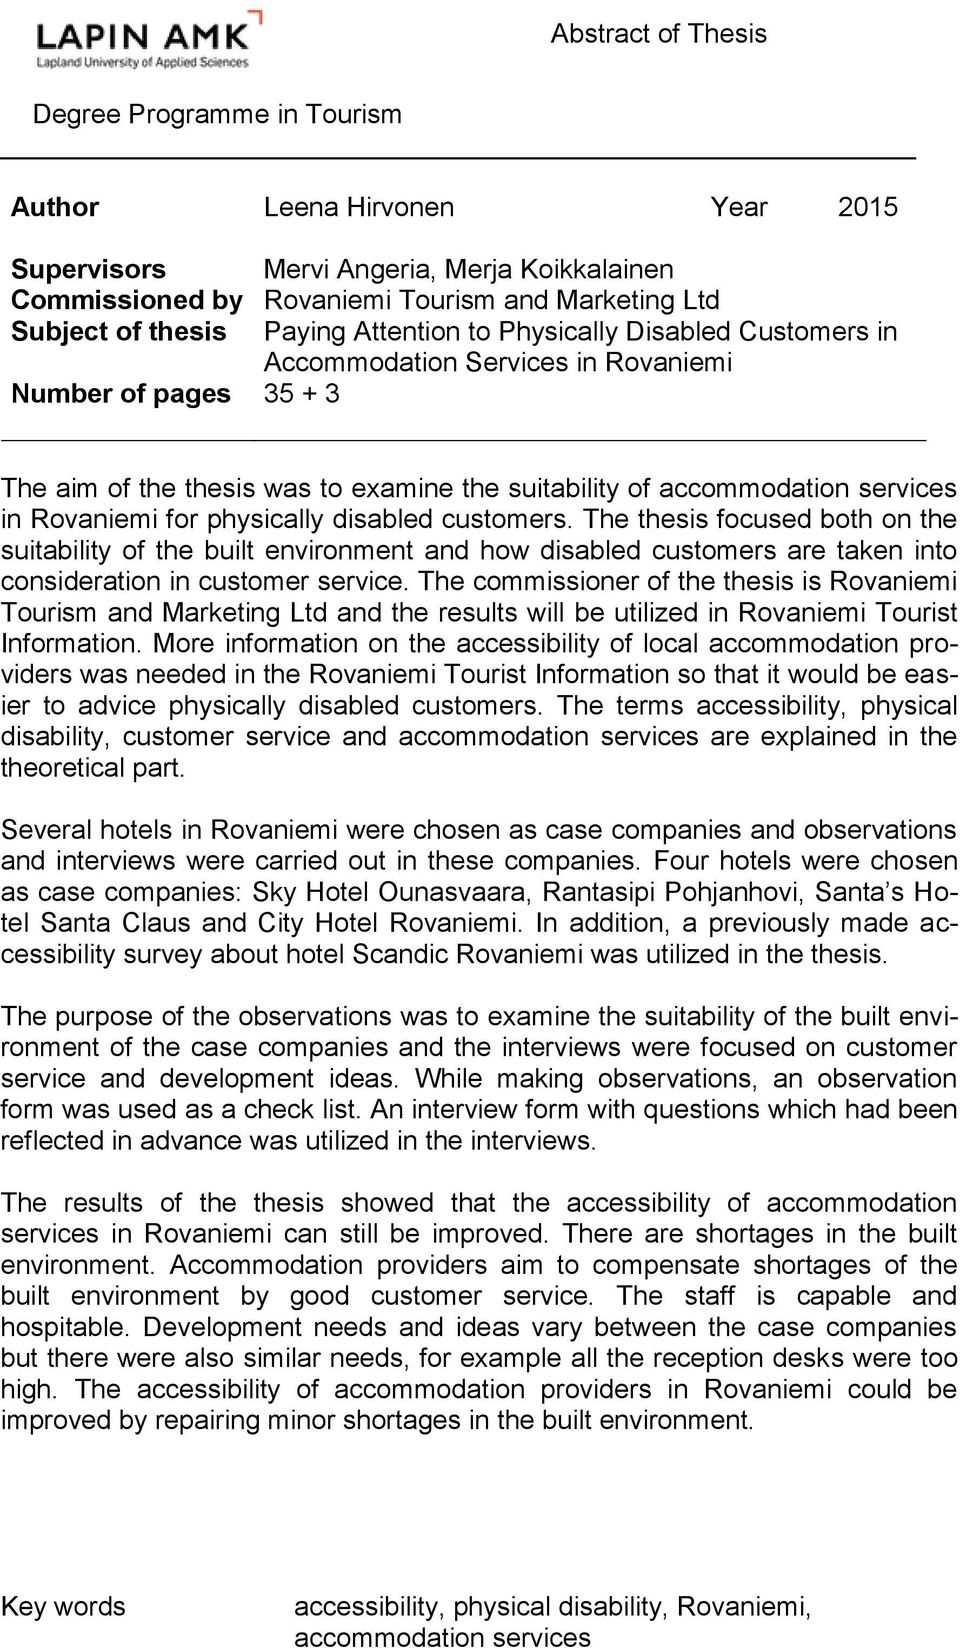 Rovaniemi for physically disabled customers. The thesis focused both on the suitability of the built environment and how disabled customers are taken into consideration in customer service.